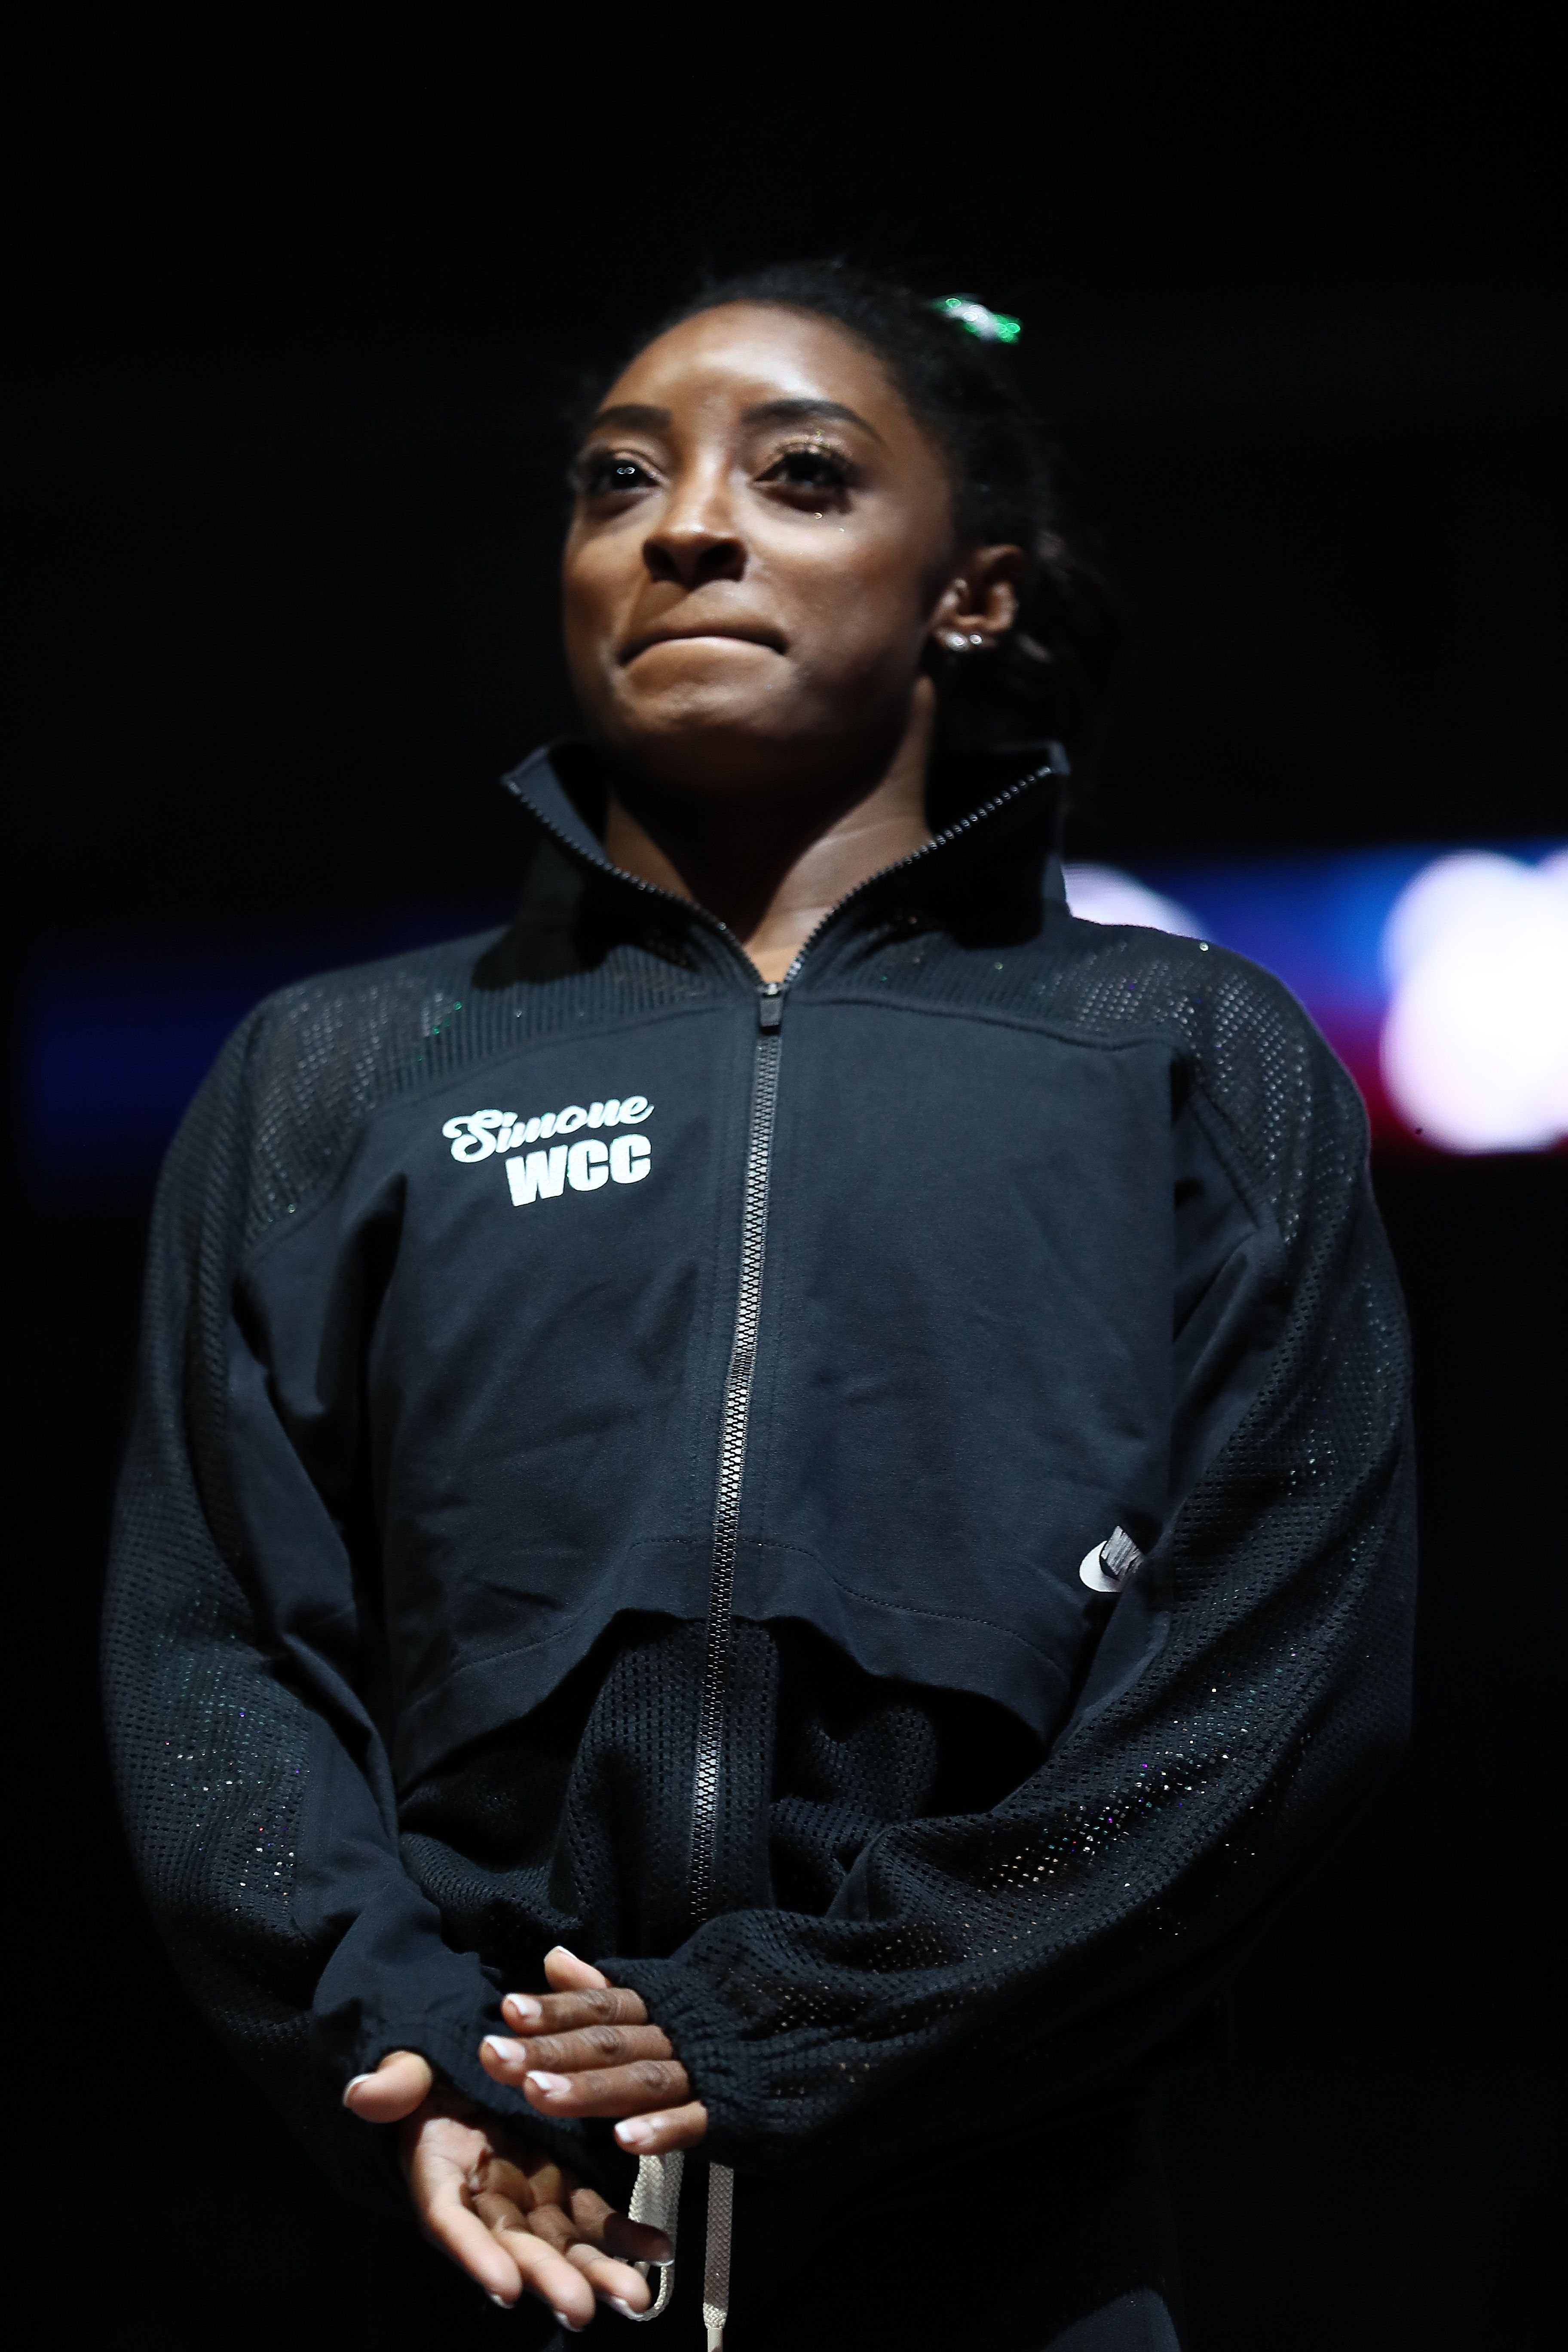 Simone Biles during the Senior Women's competition of the 2019 U.S. Gymnastics Championships at the Sprint Center on August 09, 2019 in Kansas City, Missouri. | Source: Getty Images